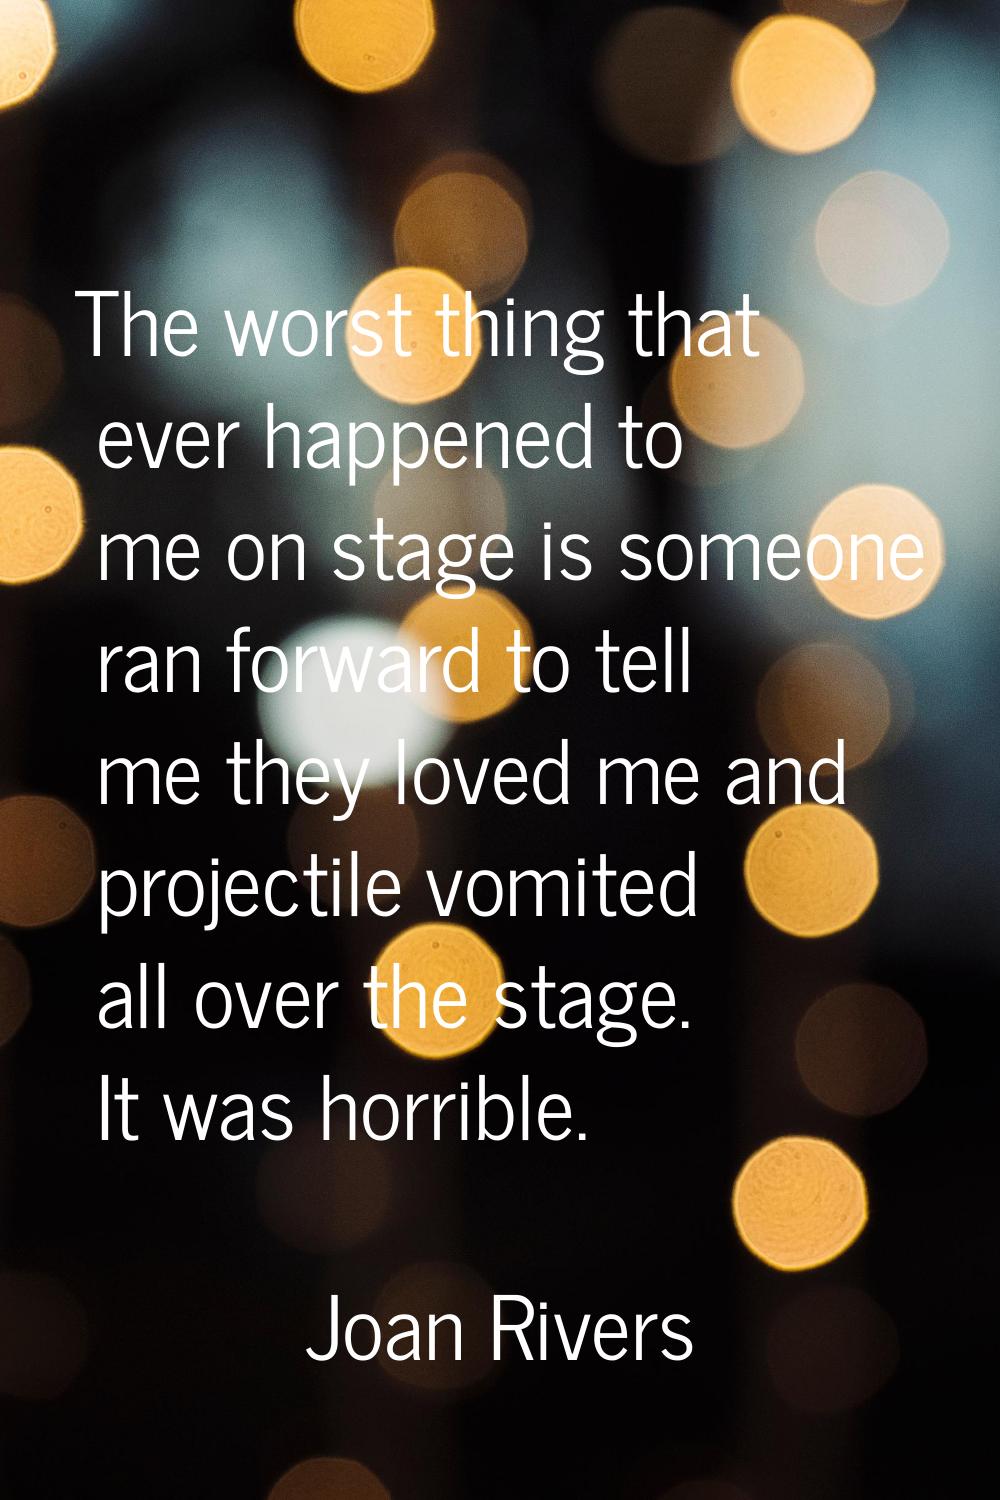 The worst thing that ever happened to me on stage is someone ran forward to tell me they loved me a